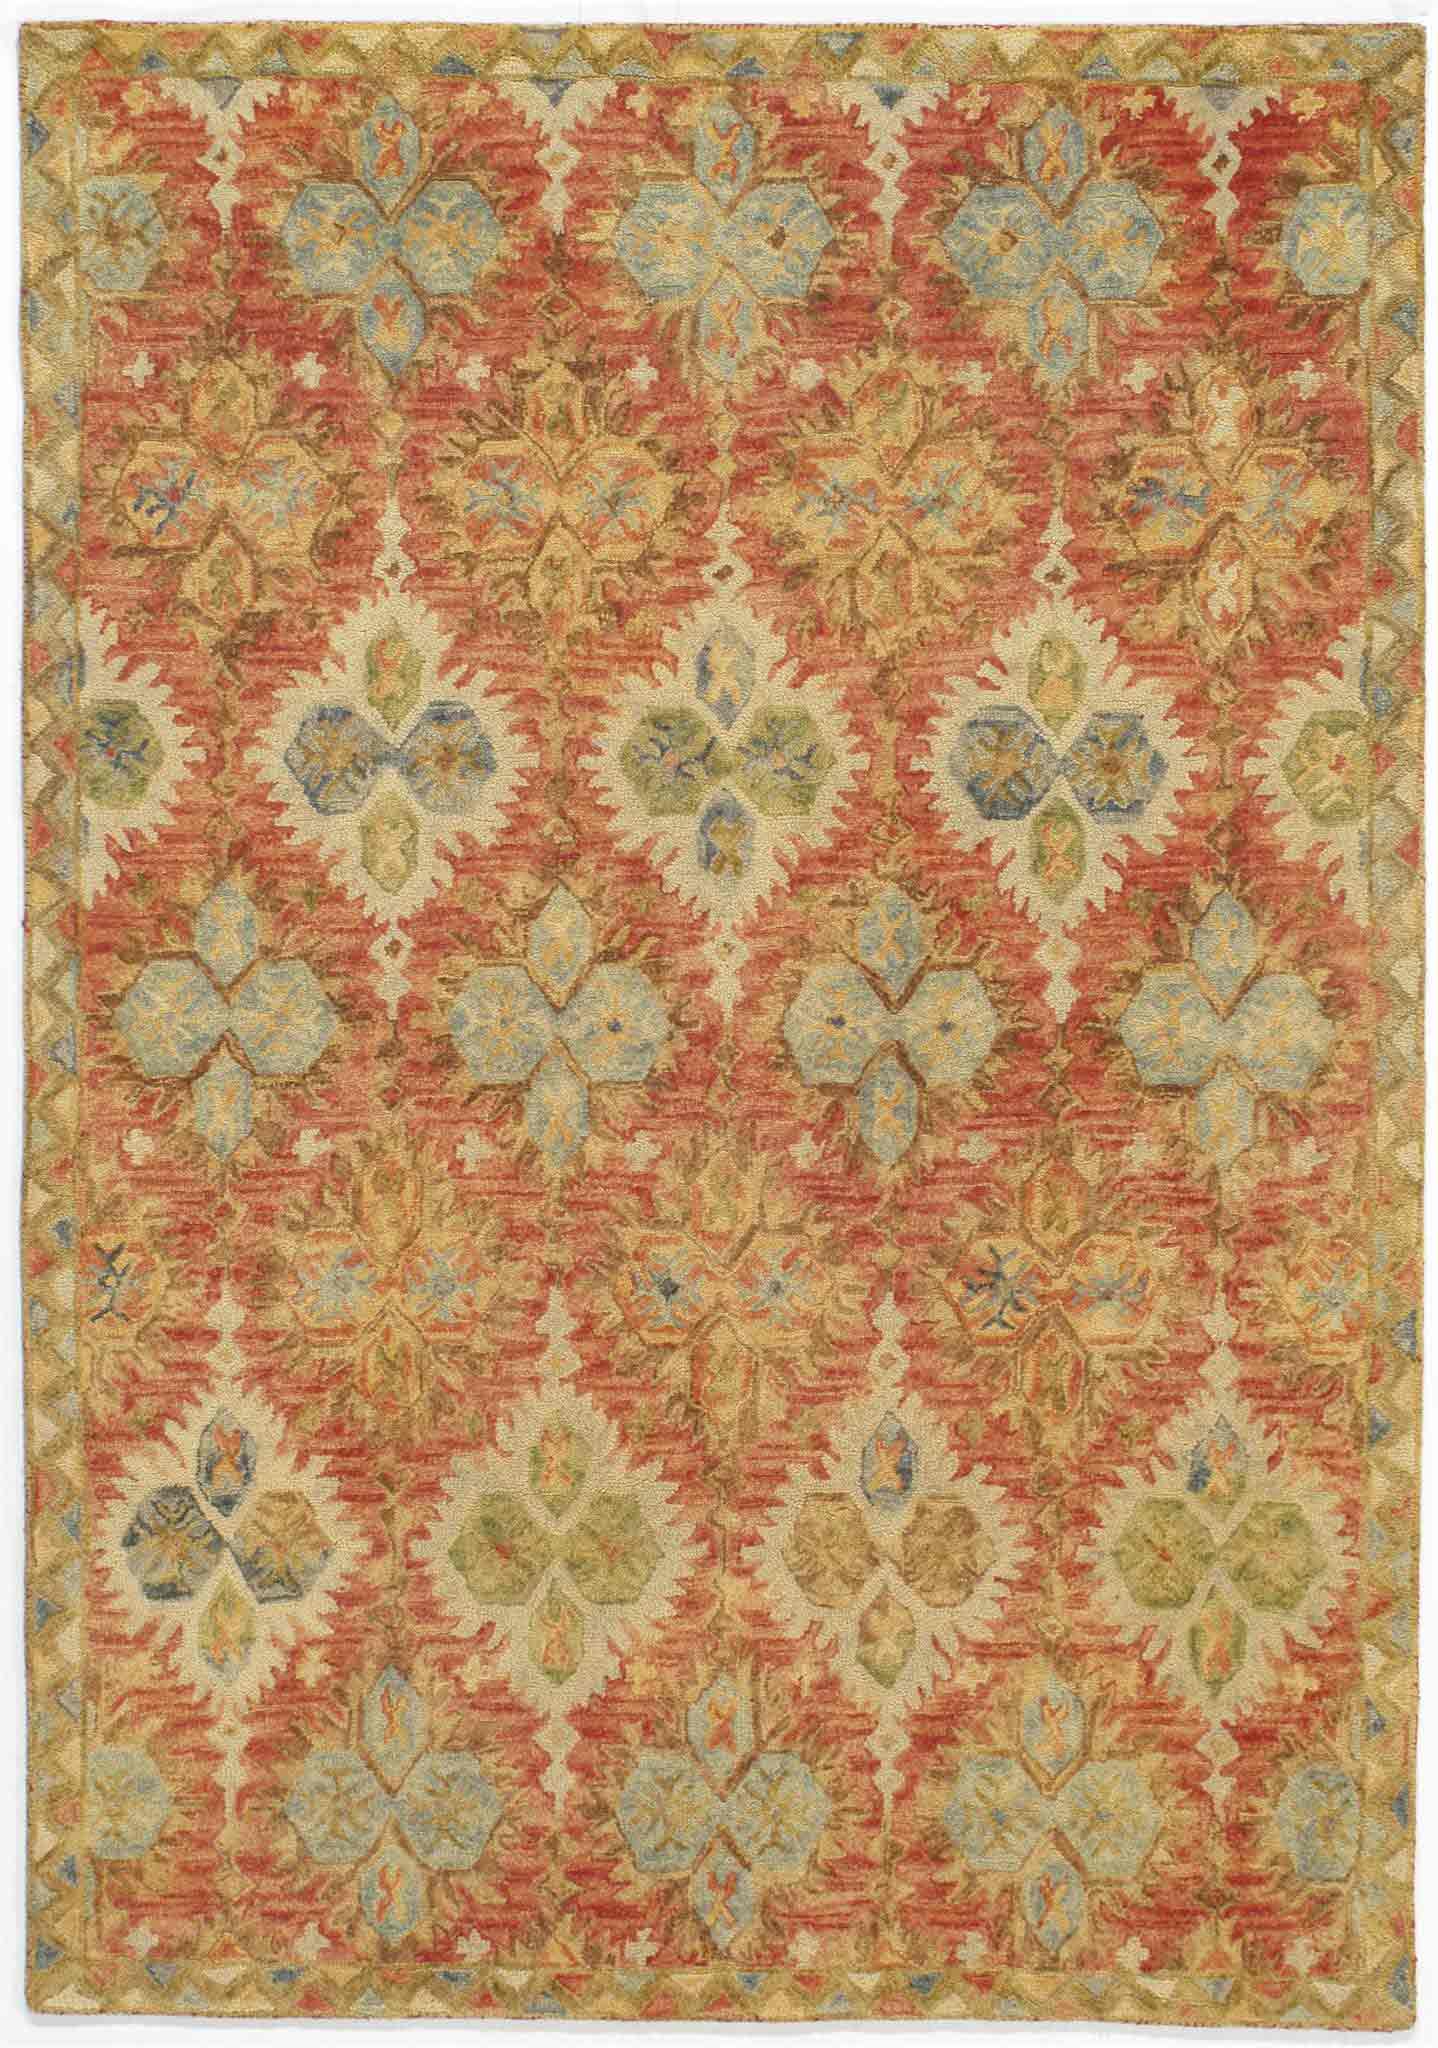 Transitional & Casual Rugs TANGIER TAN-17 Red - Burgundy & Multi Hand Hooked Rug